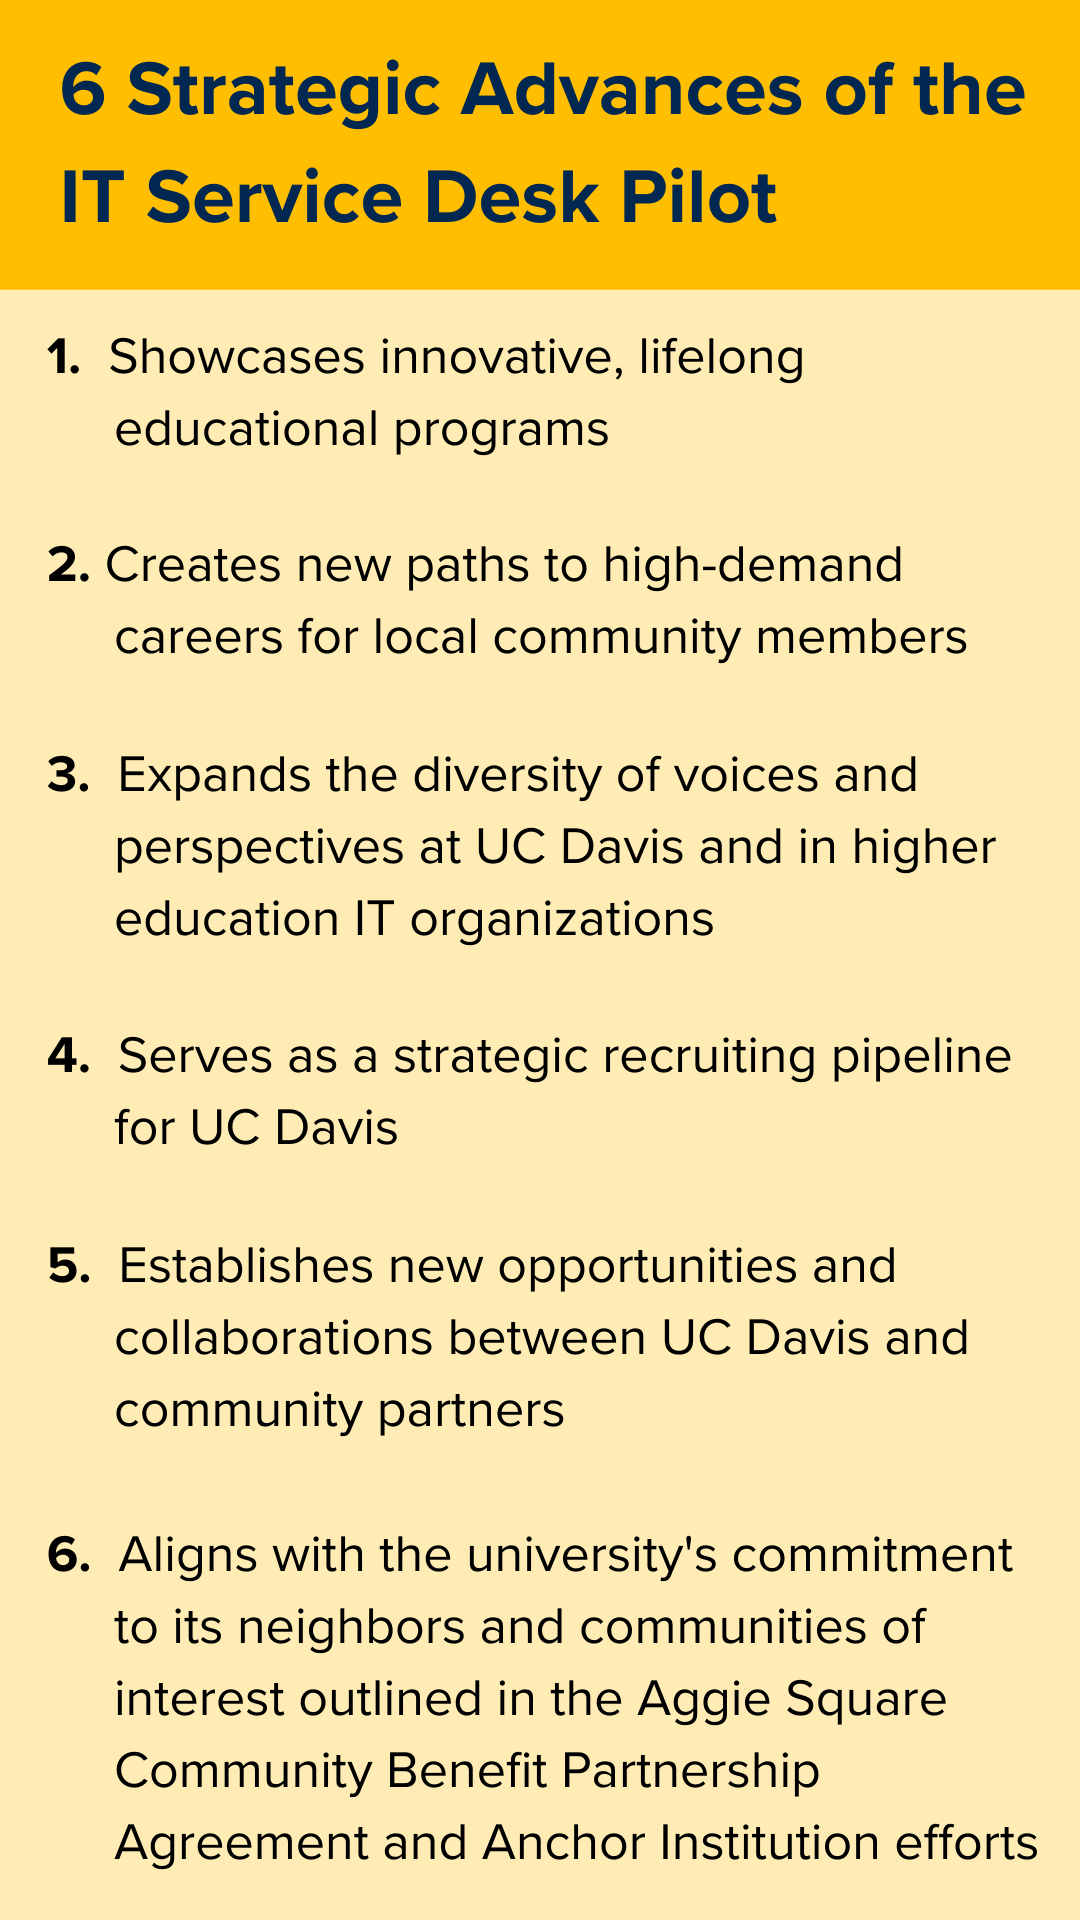 6 Strategic Advances of the IT Service Desk Pilot  1.  Showcases innovative, lifelong educational programs  2.  Creates new paths to high-demand careers for local community members  3.  Expands the diversity of voices and perspectives at UC Davis and in higher education IT organizations  4.  Serves as a strategic recruiting pipeline for UC Davis  5.  Establishes new opportunities and collaborations between UC Davis and community partners  6.  Aligns with the university's commitment to its neighbors and comm